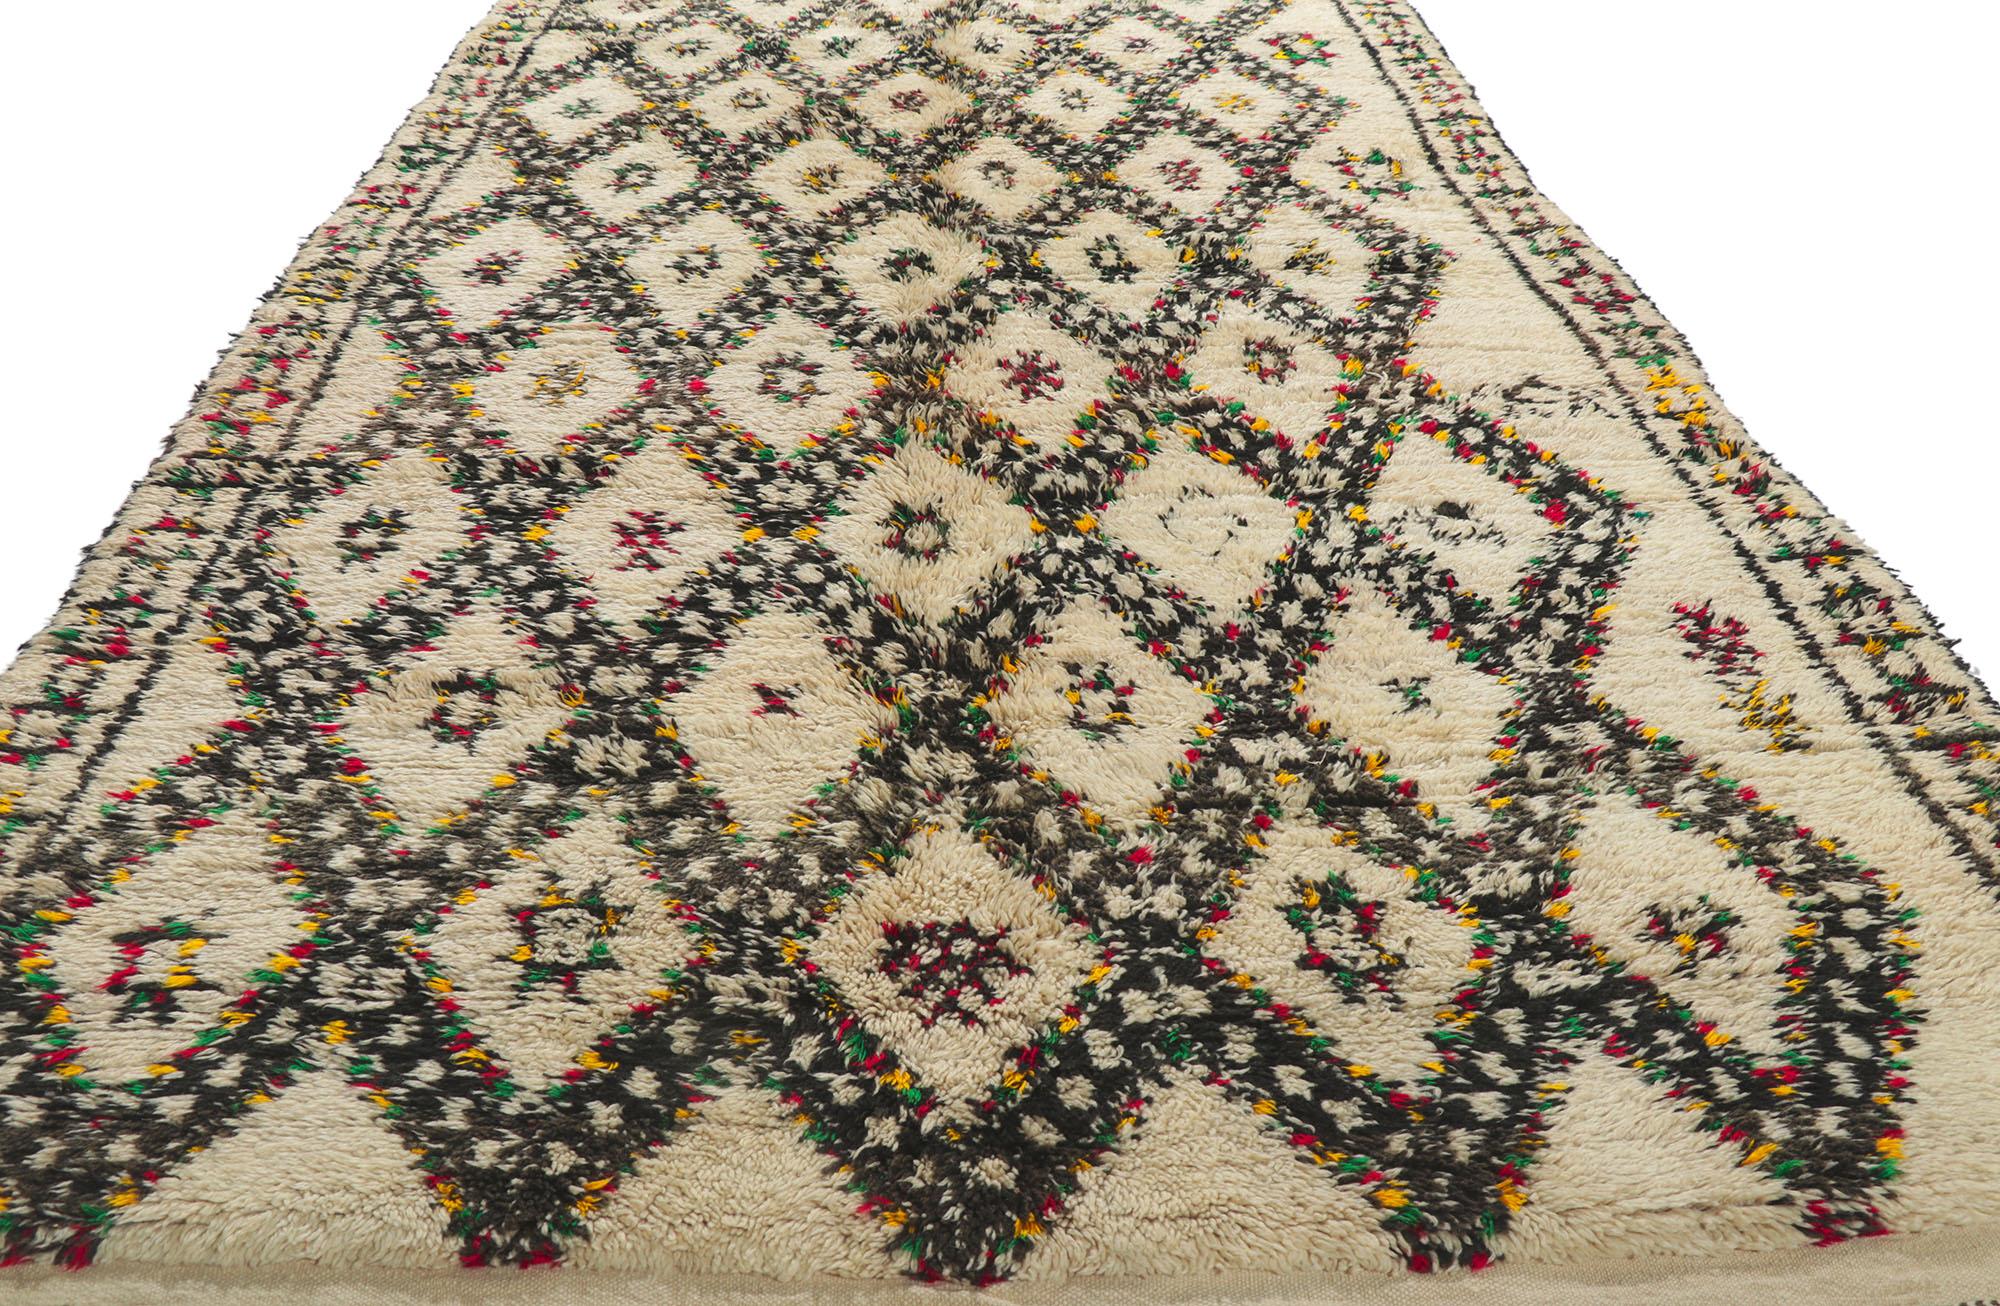 Hand-Knotted Vintage Moroccan Beni Ourain Rug, Midcentury Boho Meets Tribal Enchantment For Sale